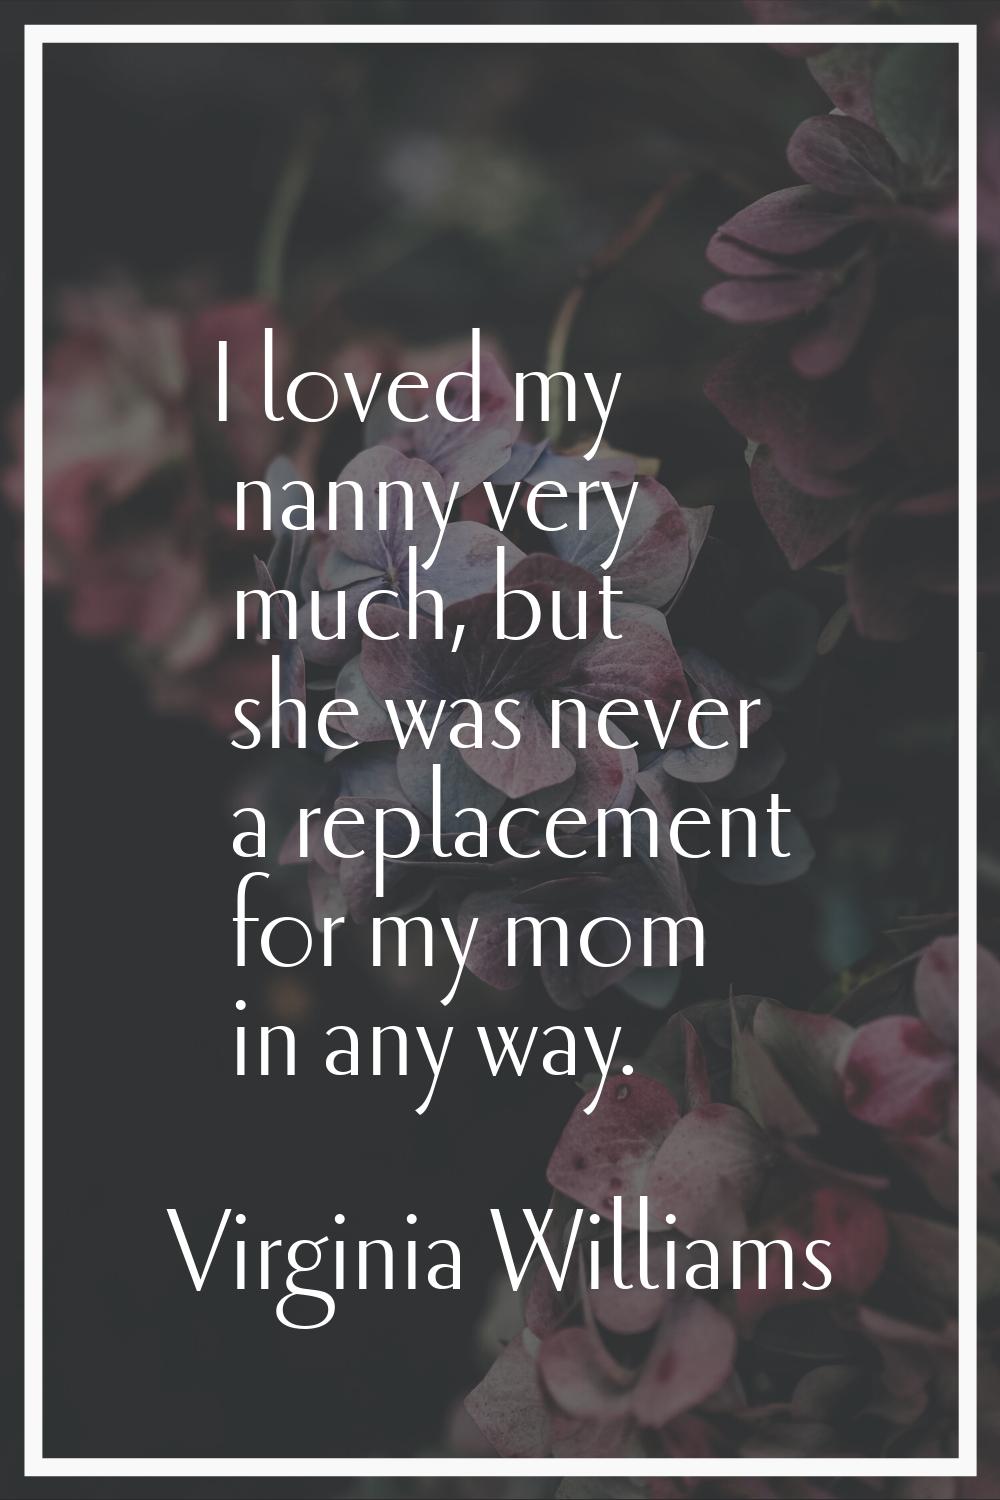 I loved my nanny very much, but she was never a replacement for my mom in any way.